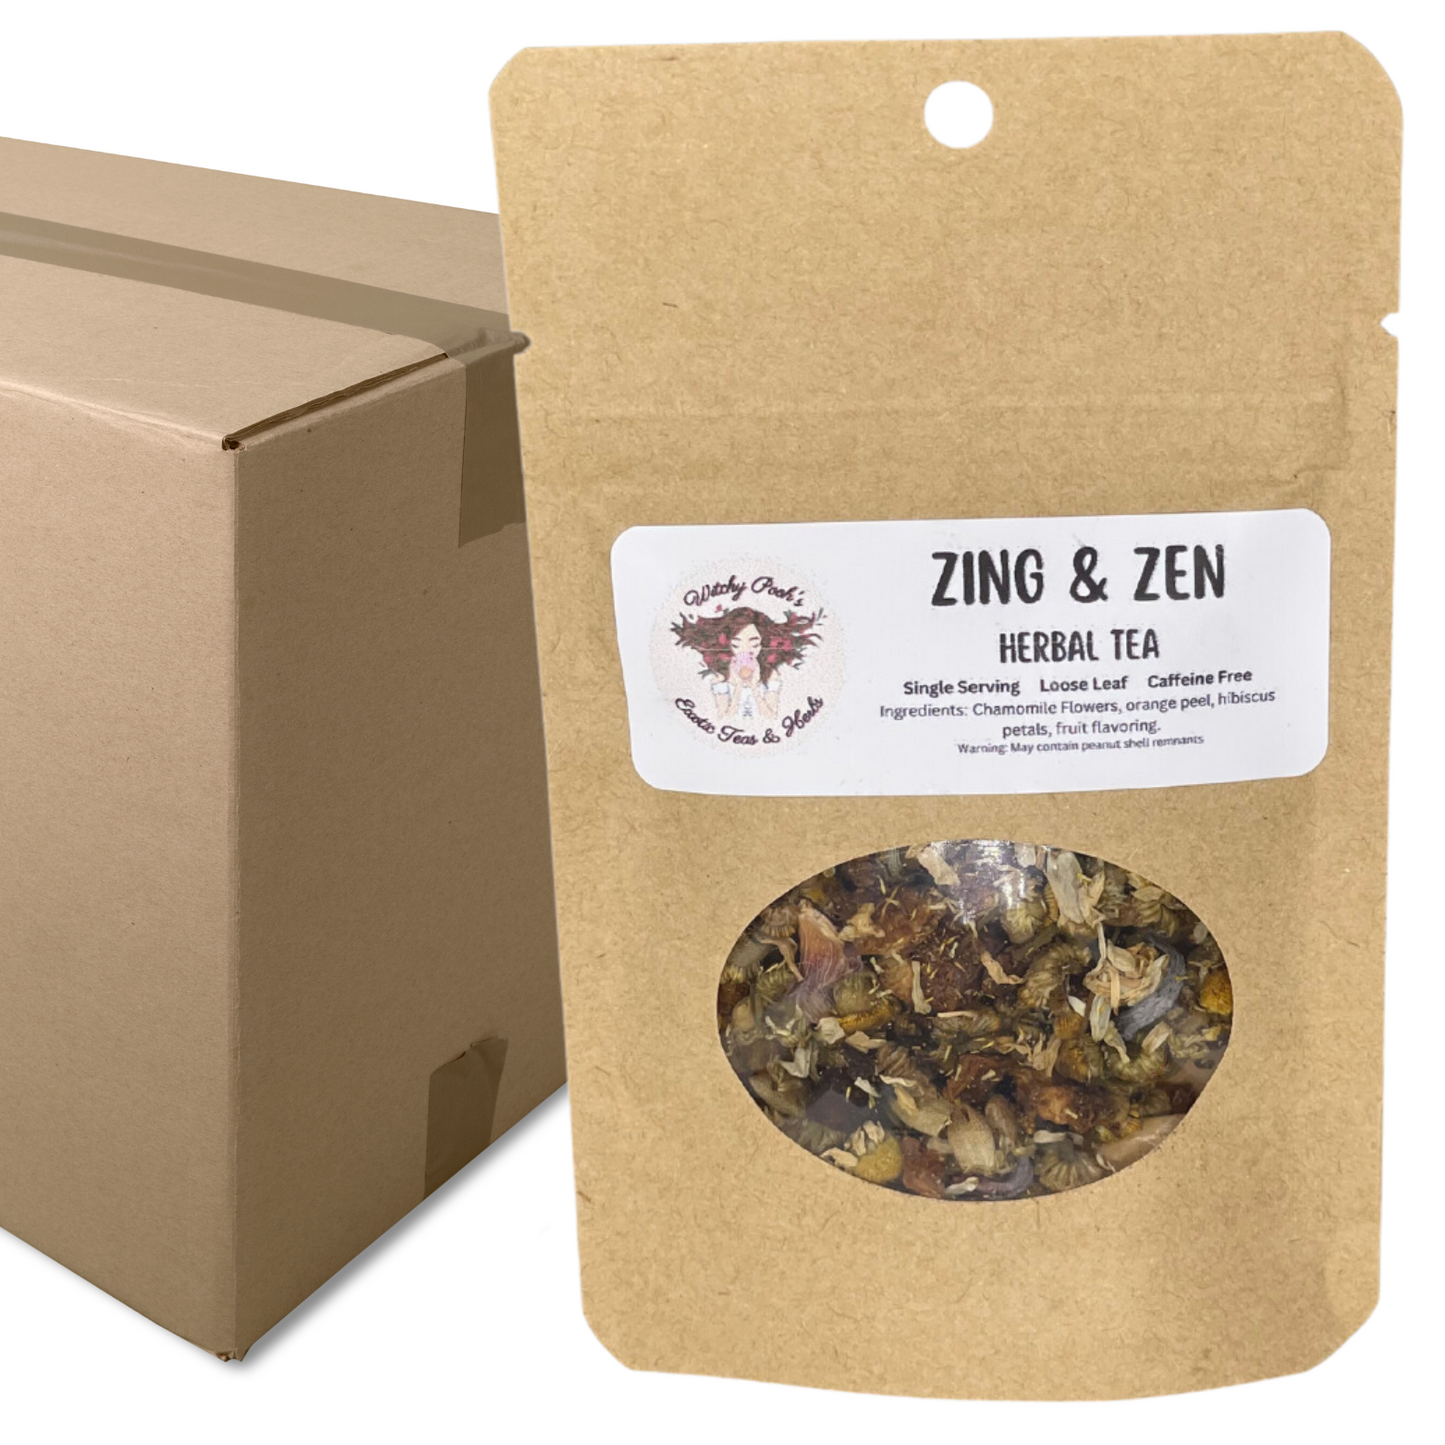 Witchy Pooh's Zing & Zen Loose Leaf Citrus Flavored Chamomile Herbal Tea, Caffeine Free